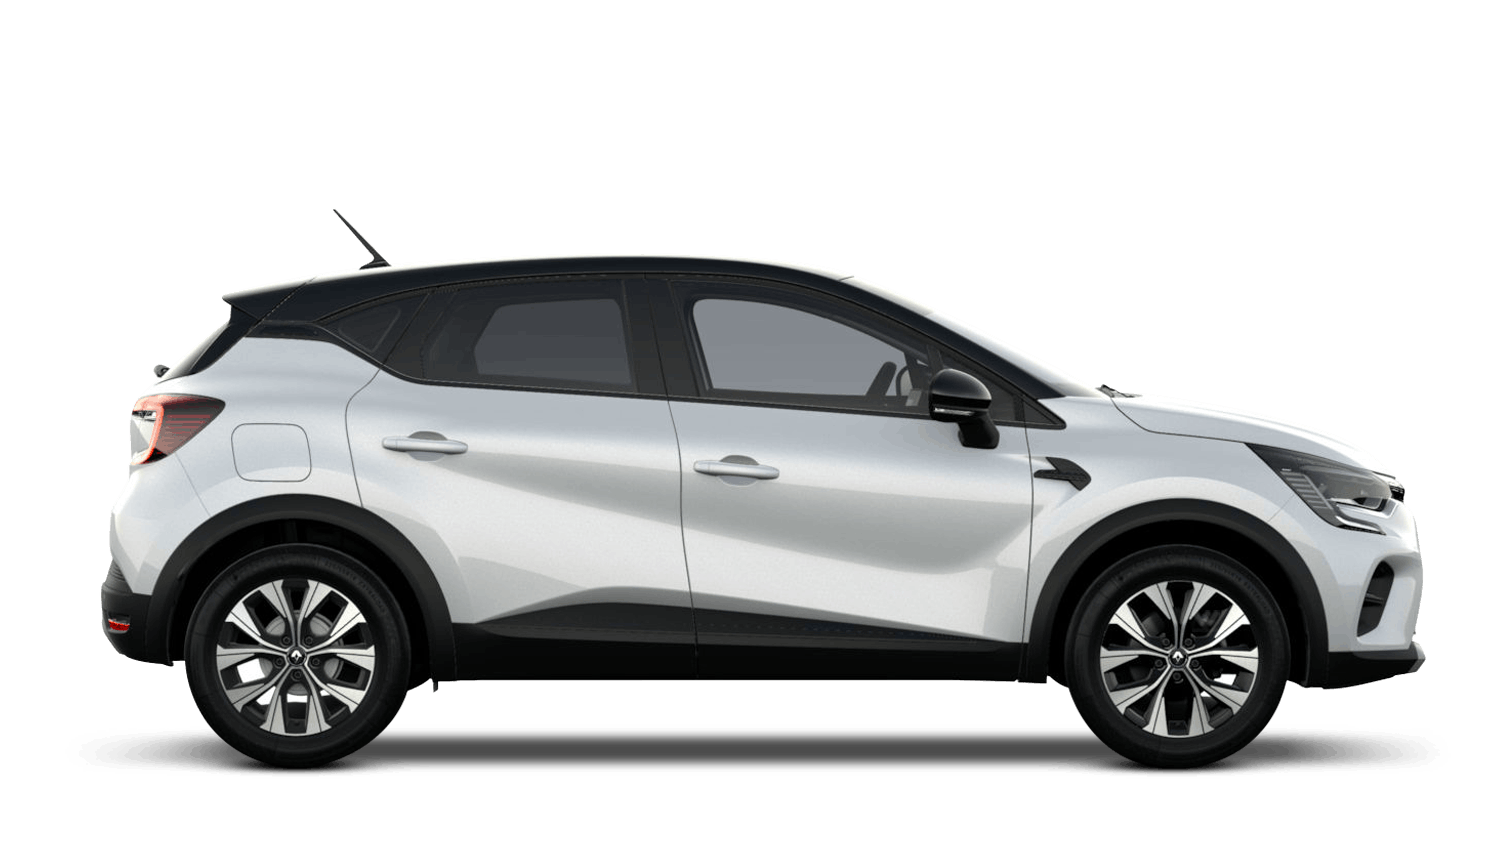 CAPTUR TCE 90 Petrol with up to £2,250 finance deposit contribution | 6.9% APR